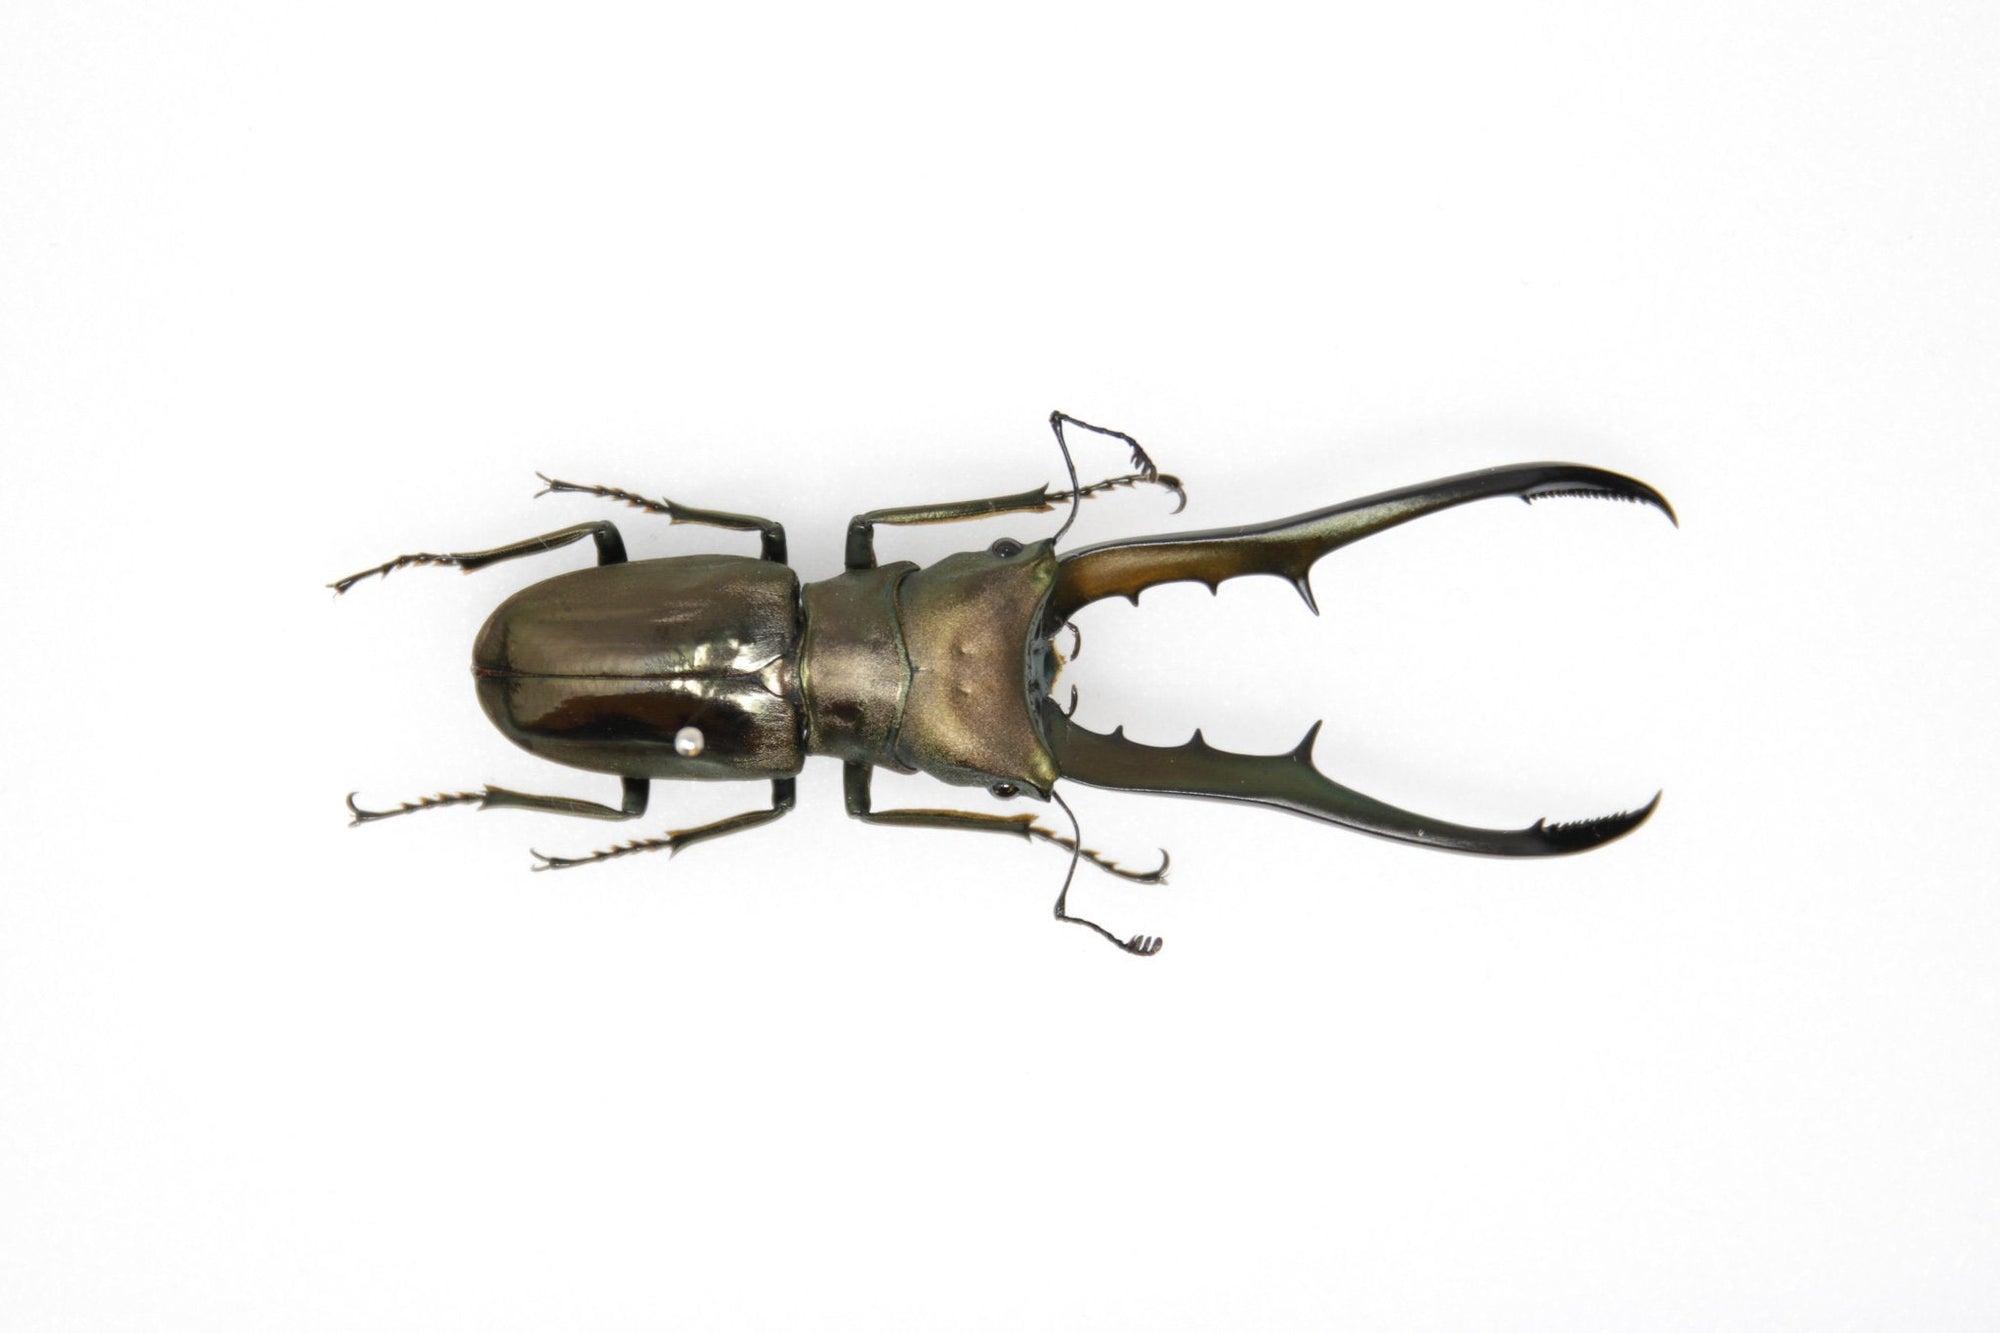 Cyclommatus metallifer | Pinned Stag Beetle Insect Specimen | Presented in a Gift Box